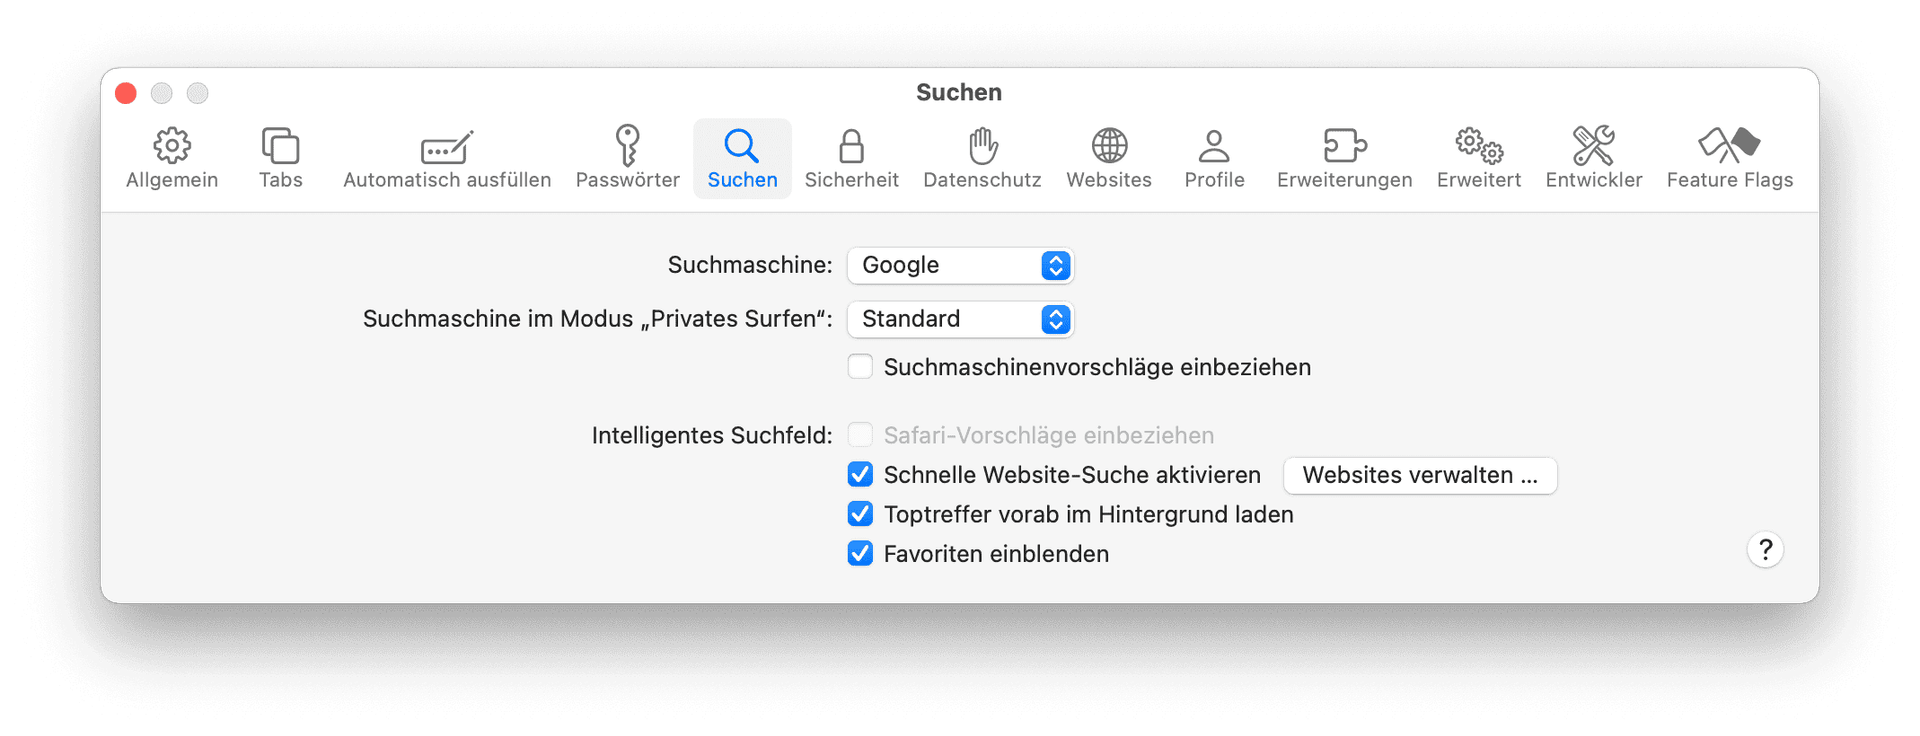 disable-include-search-engine-suggestions.png